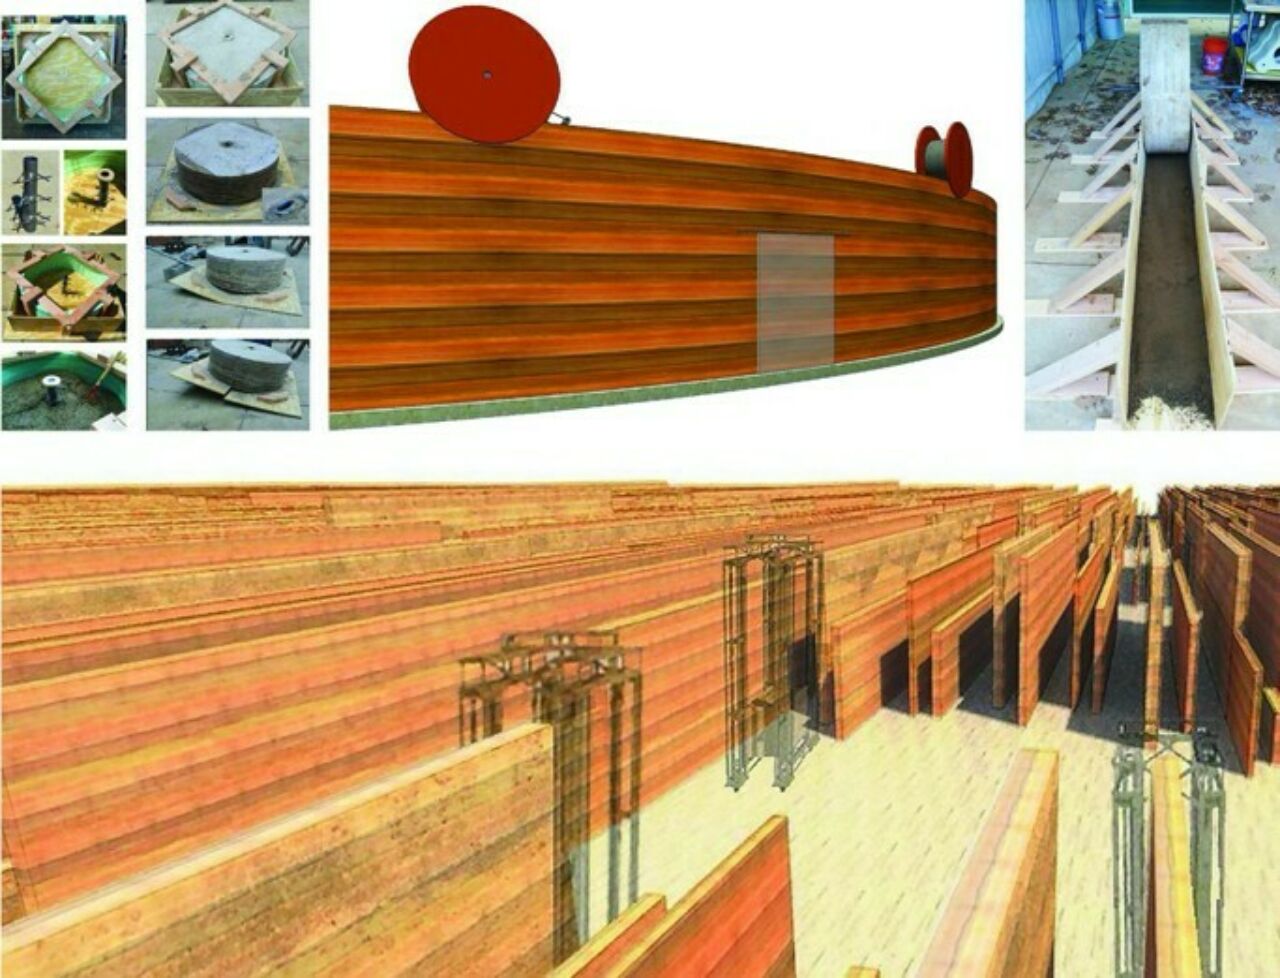 A group of images of rammed earth fabrication process and tooling, plus finished design architectural renderings.